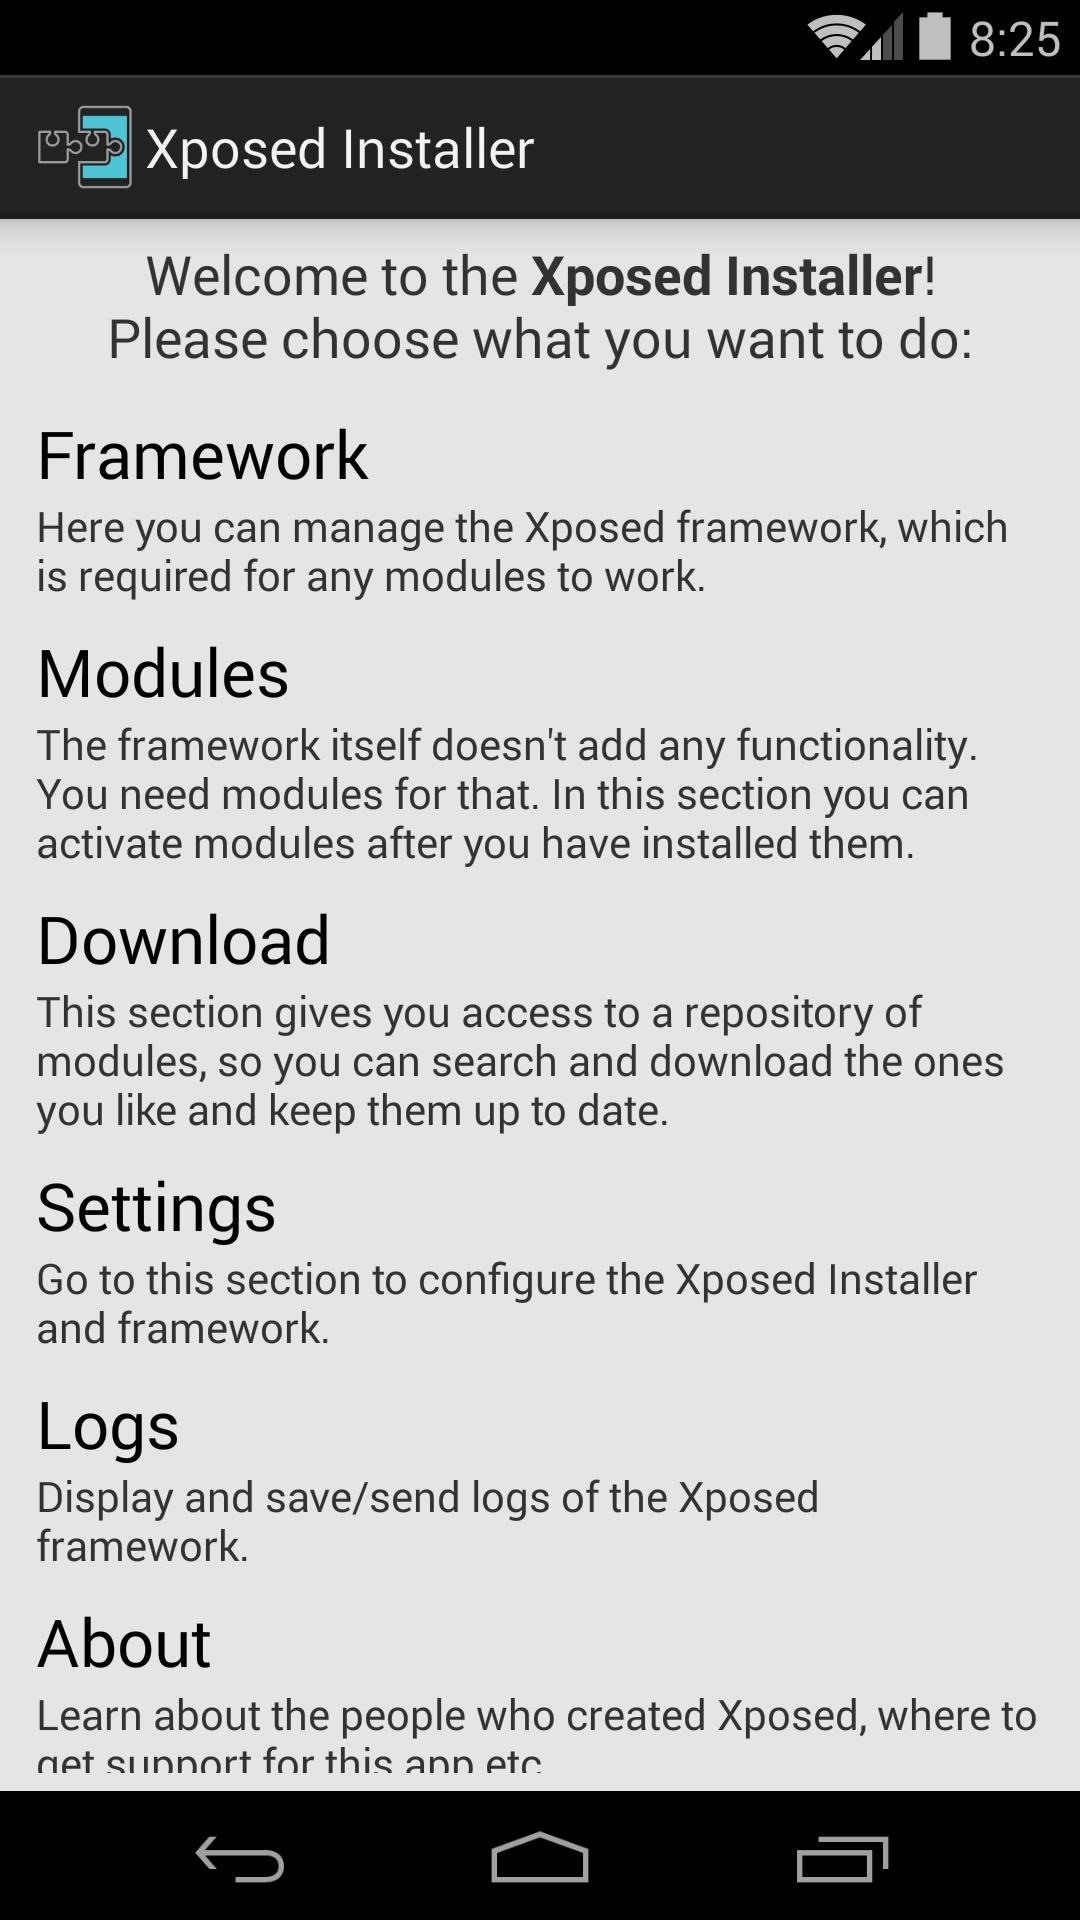 Xposed Installer Gets New Features & UI in Massive Update